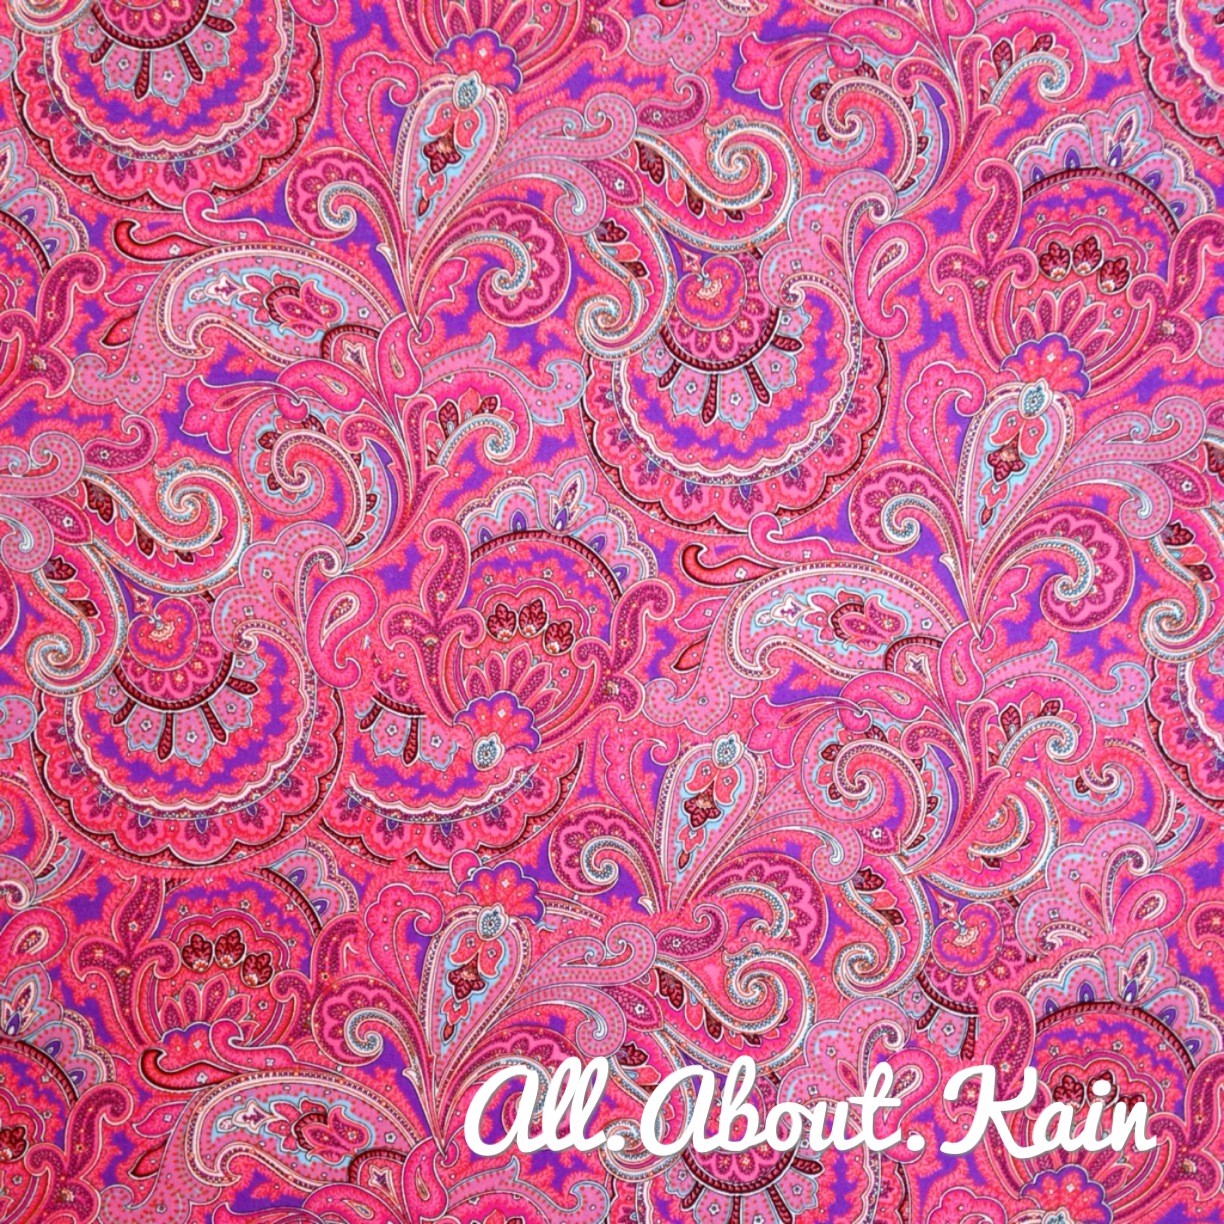 Its All About Kain!: Small Flower-ish! Pink Paisley! Modern Abstract!